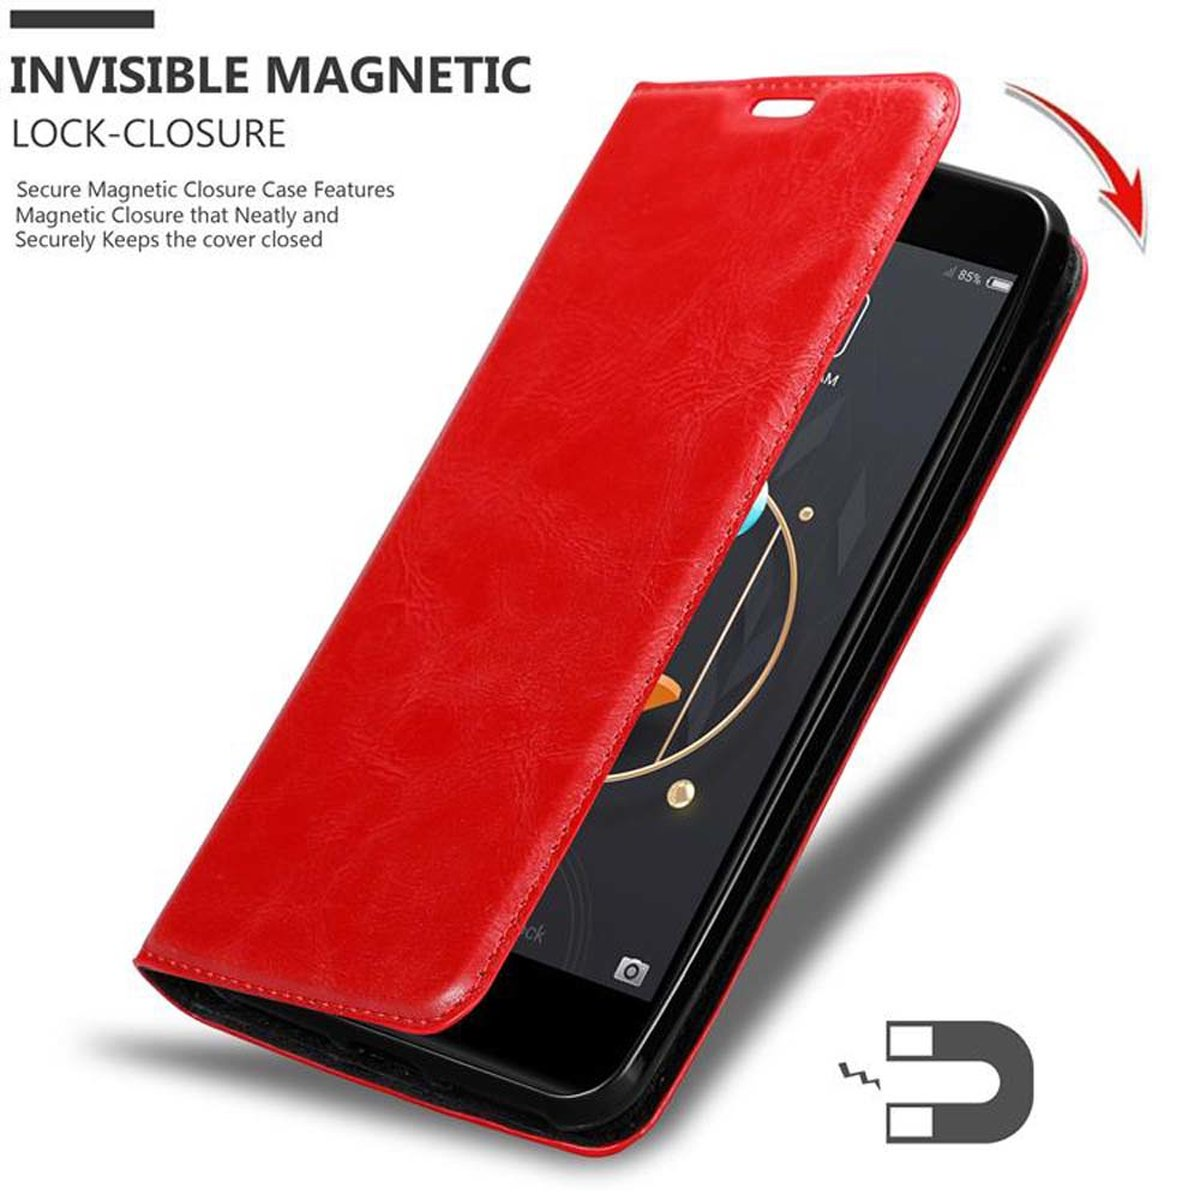 Book APFEL M2, ROT ZTE, Bookcover, CADORABO Invisible Hülle Magnet, Nubia